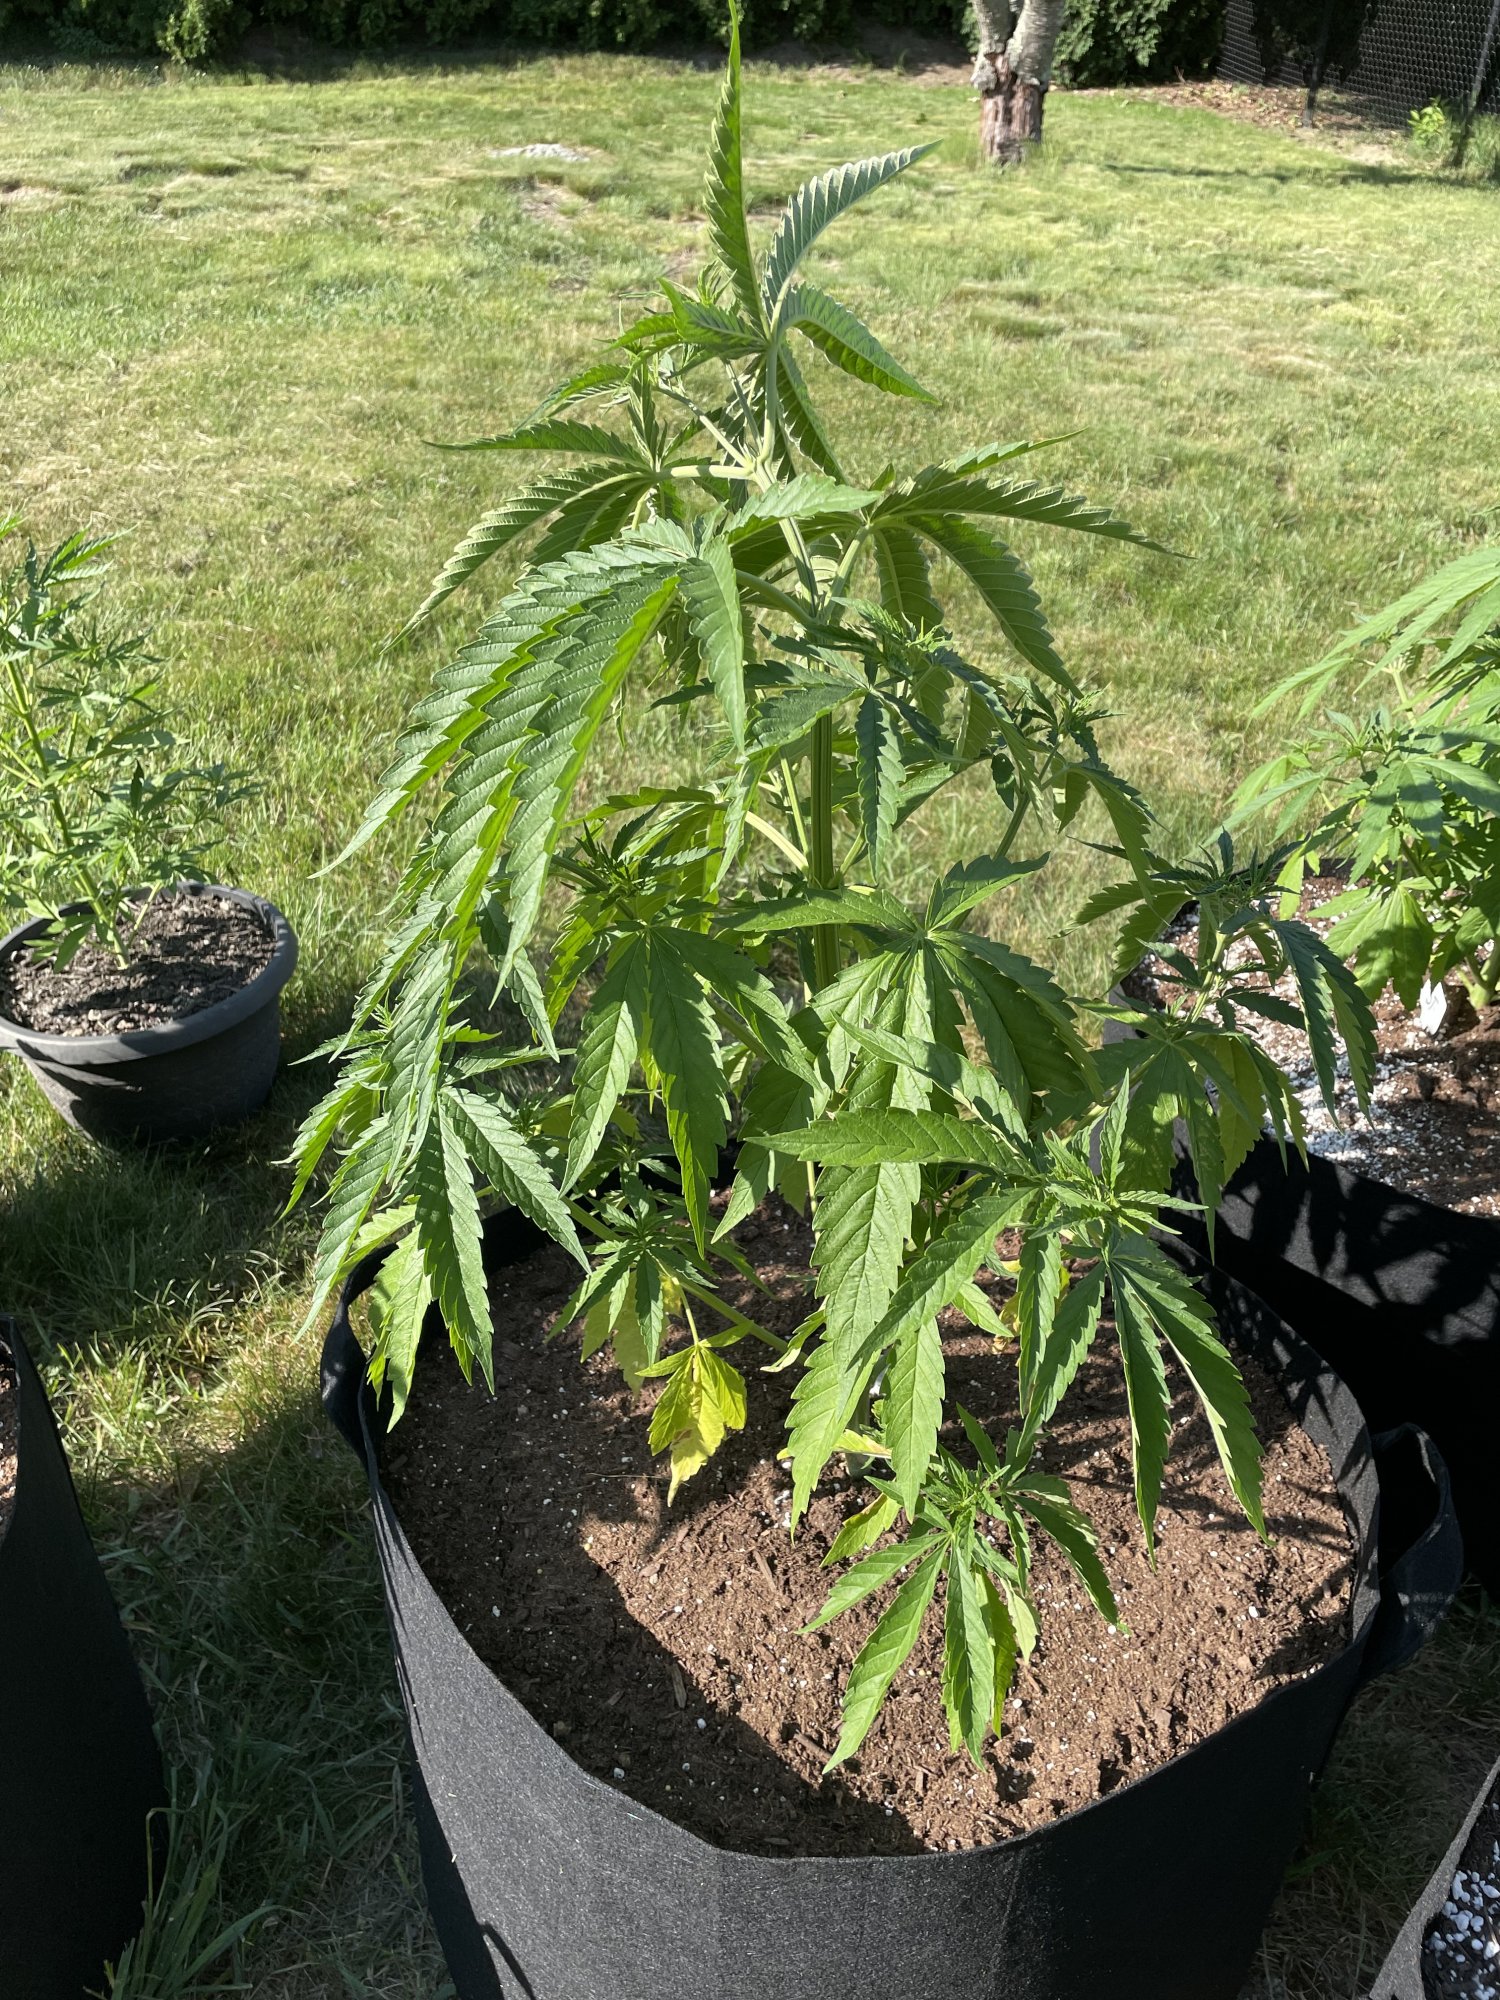 Whats going on with this plant please help